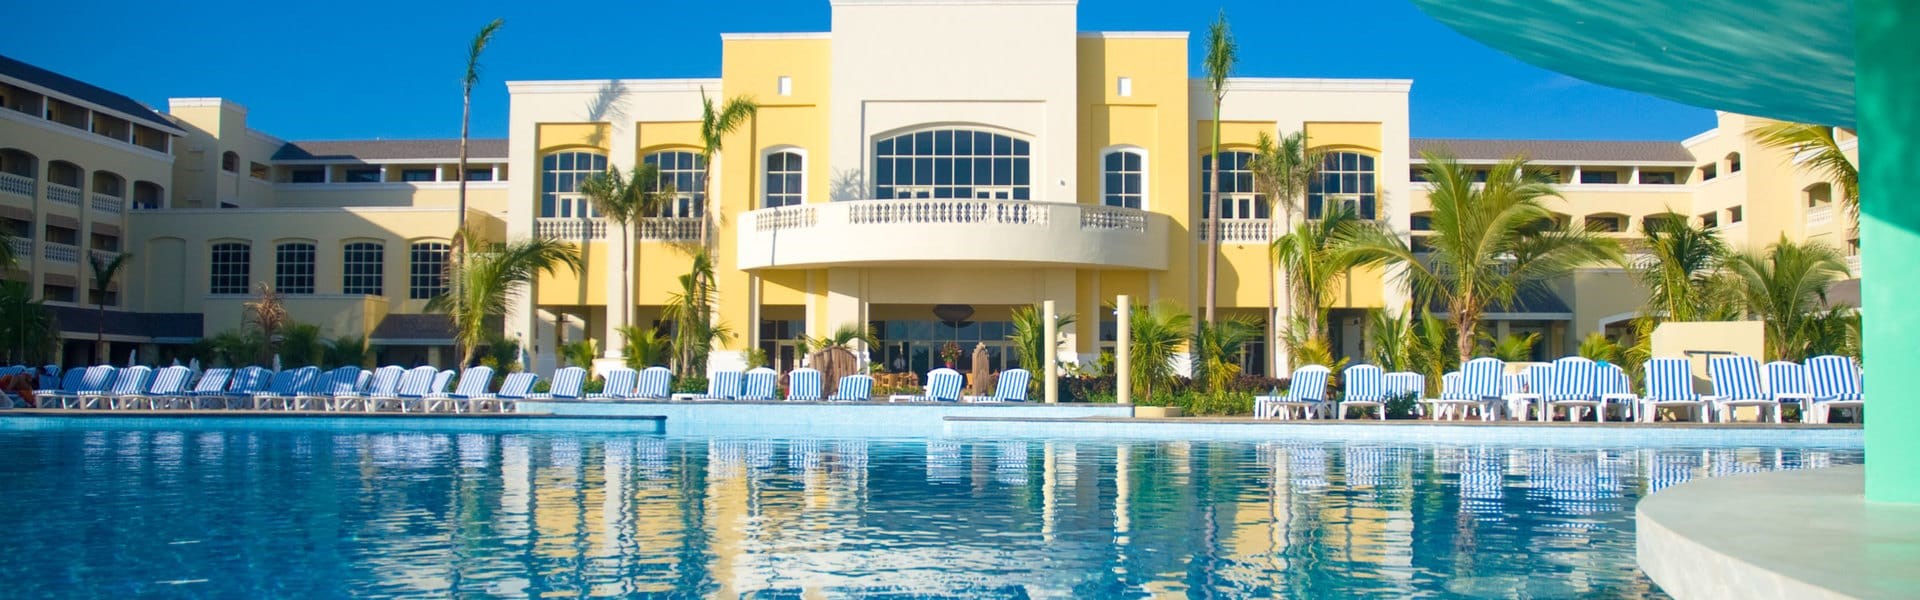 Iberostar Rose Hall Beach Hotel Wedding Venue And Packages The